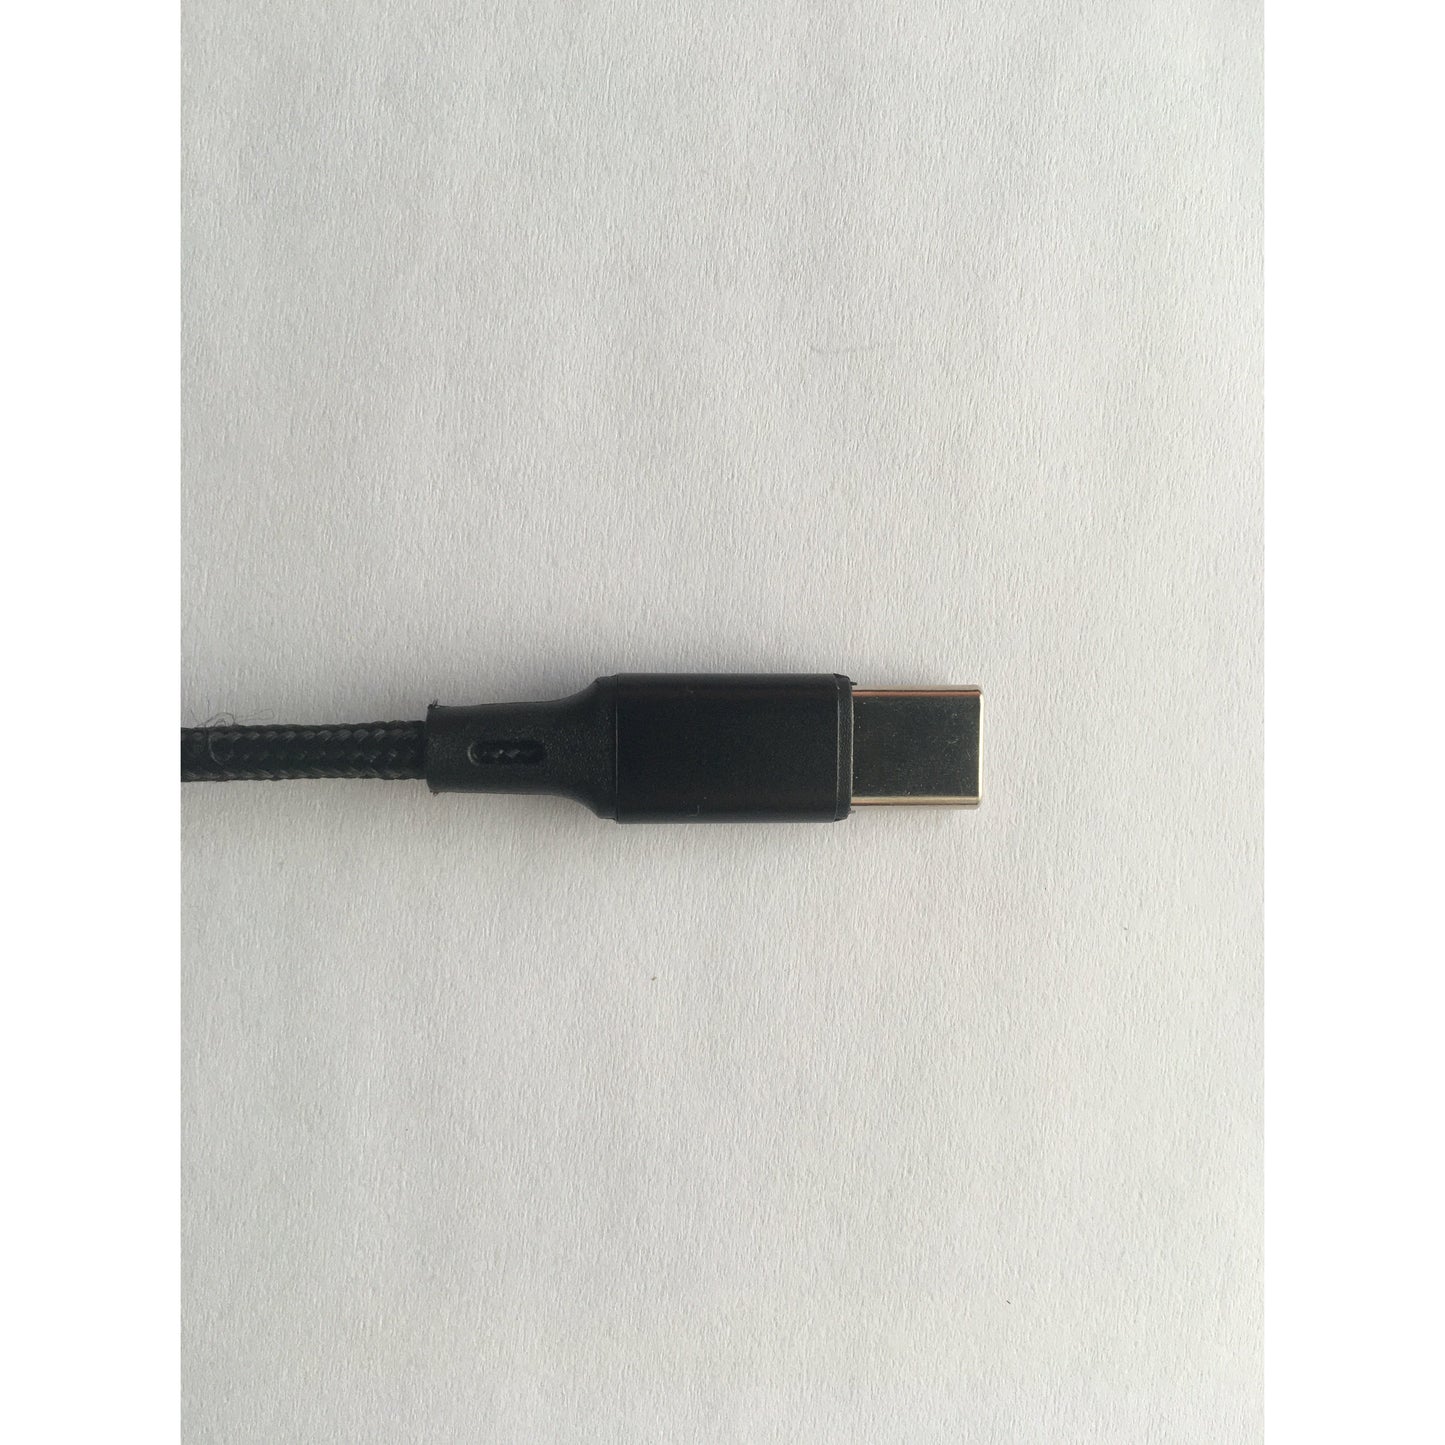 USB-C to USB-A Cable - X-Bows Store